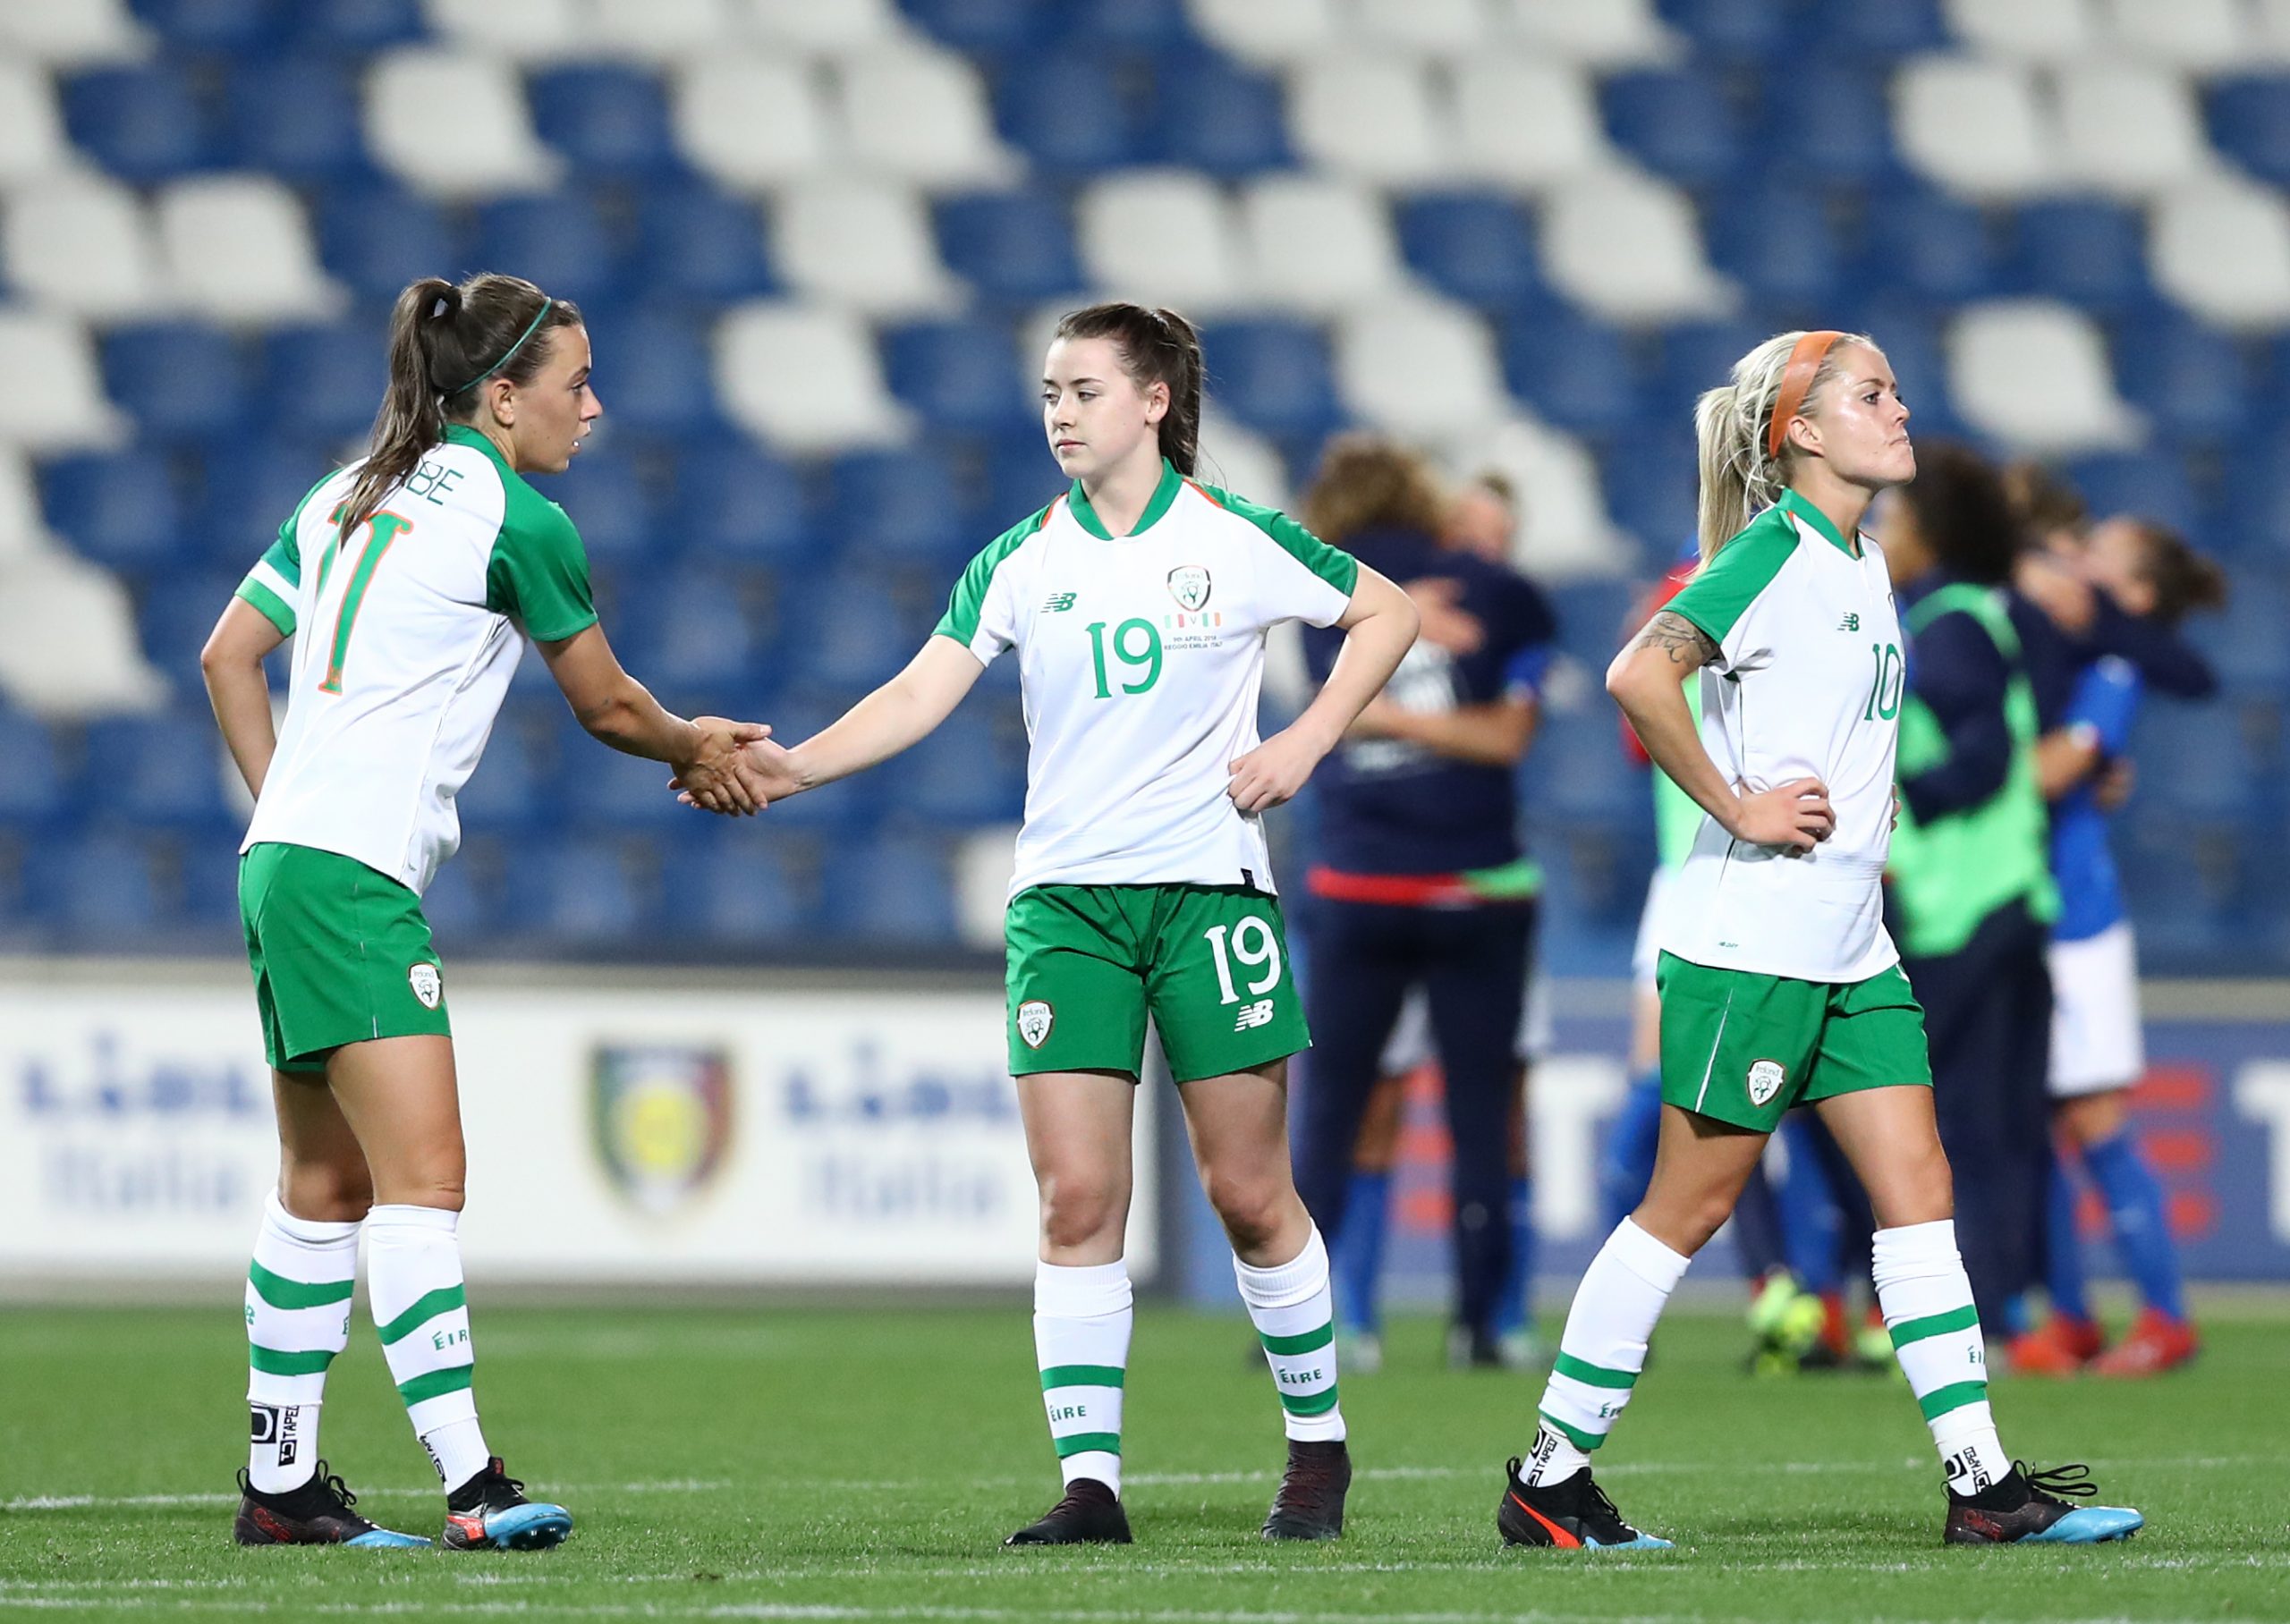 Four Shelbourne players in Republic of Ireland WNT squad